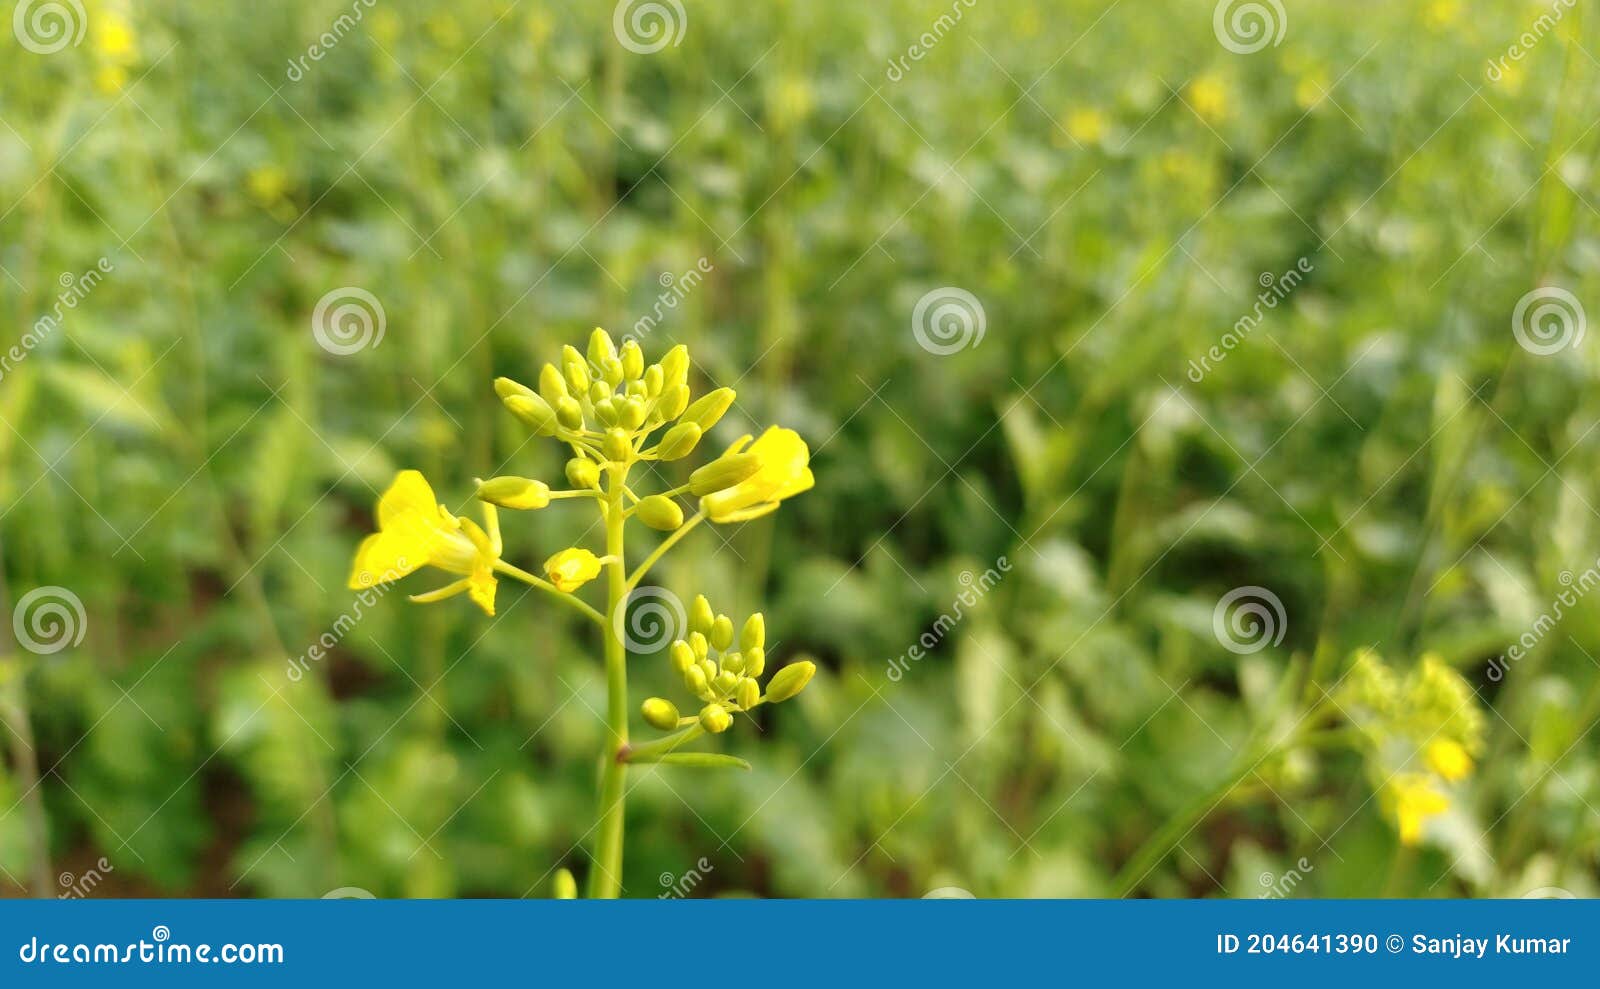 blurred picture of mustard flowers